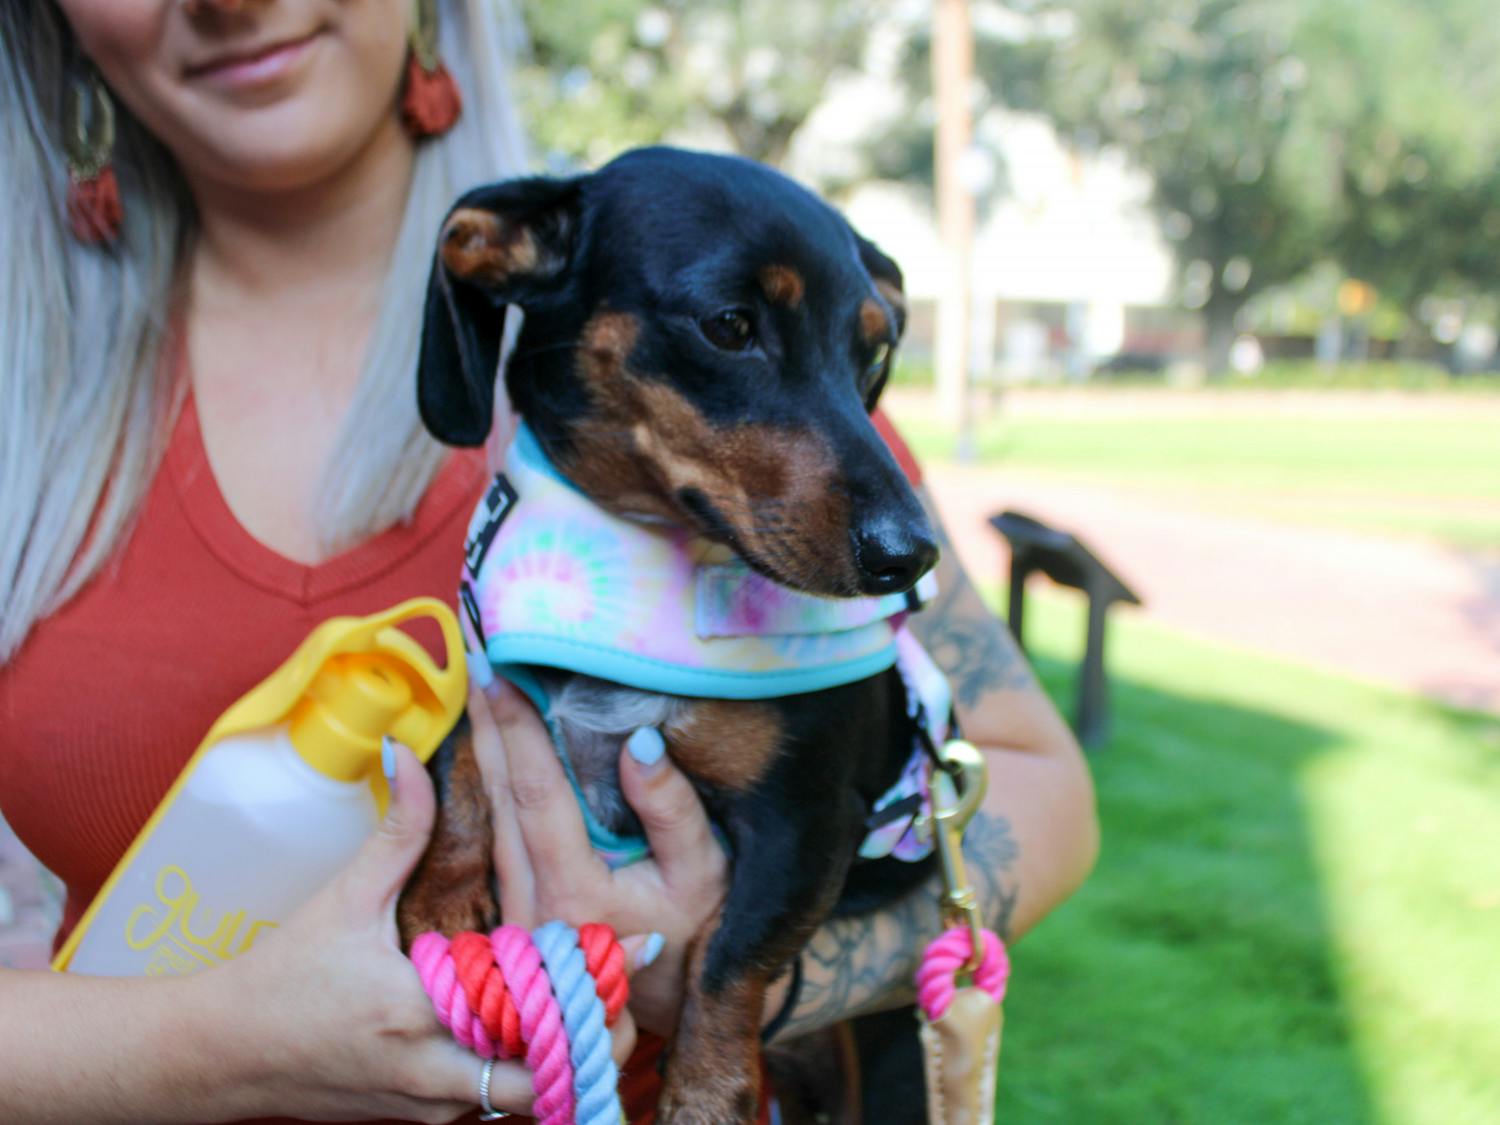 A dog walk participant holds their black and brown dachshund during a social event held by the community dog-walking group Dachshunds of Columbia on Sept. 17, 2022. The group gathered with their furry friends for a walk through USC's Horseshoe on Saturday morning.